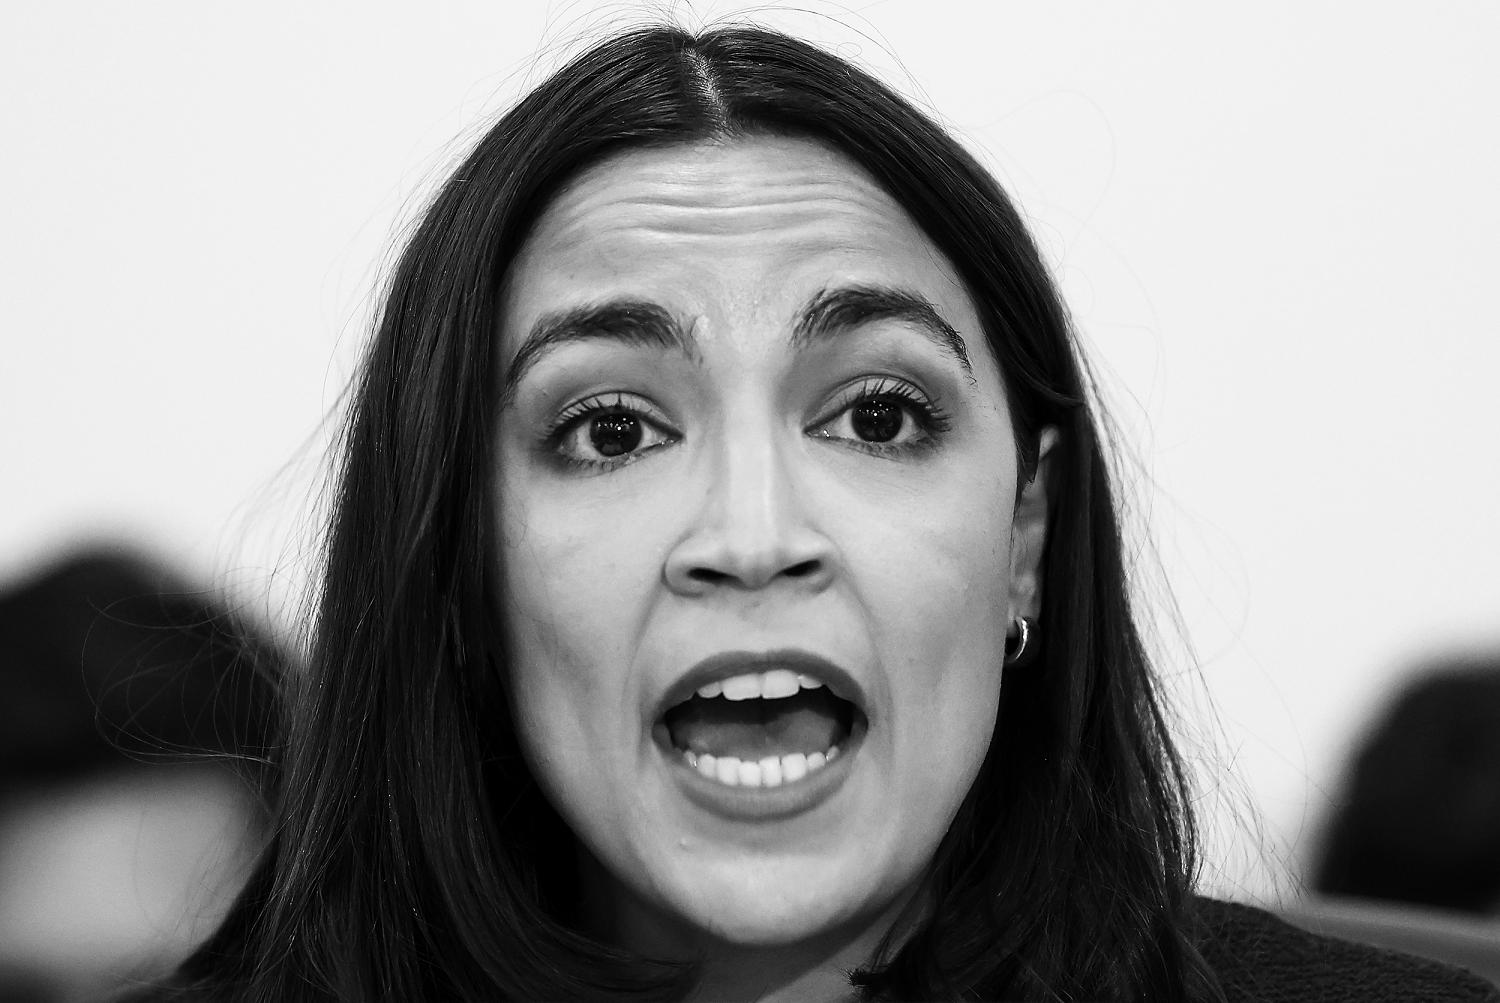 Thomas and Alito think they're untouchable. AOC would like to remind them otherwise.